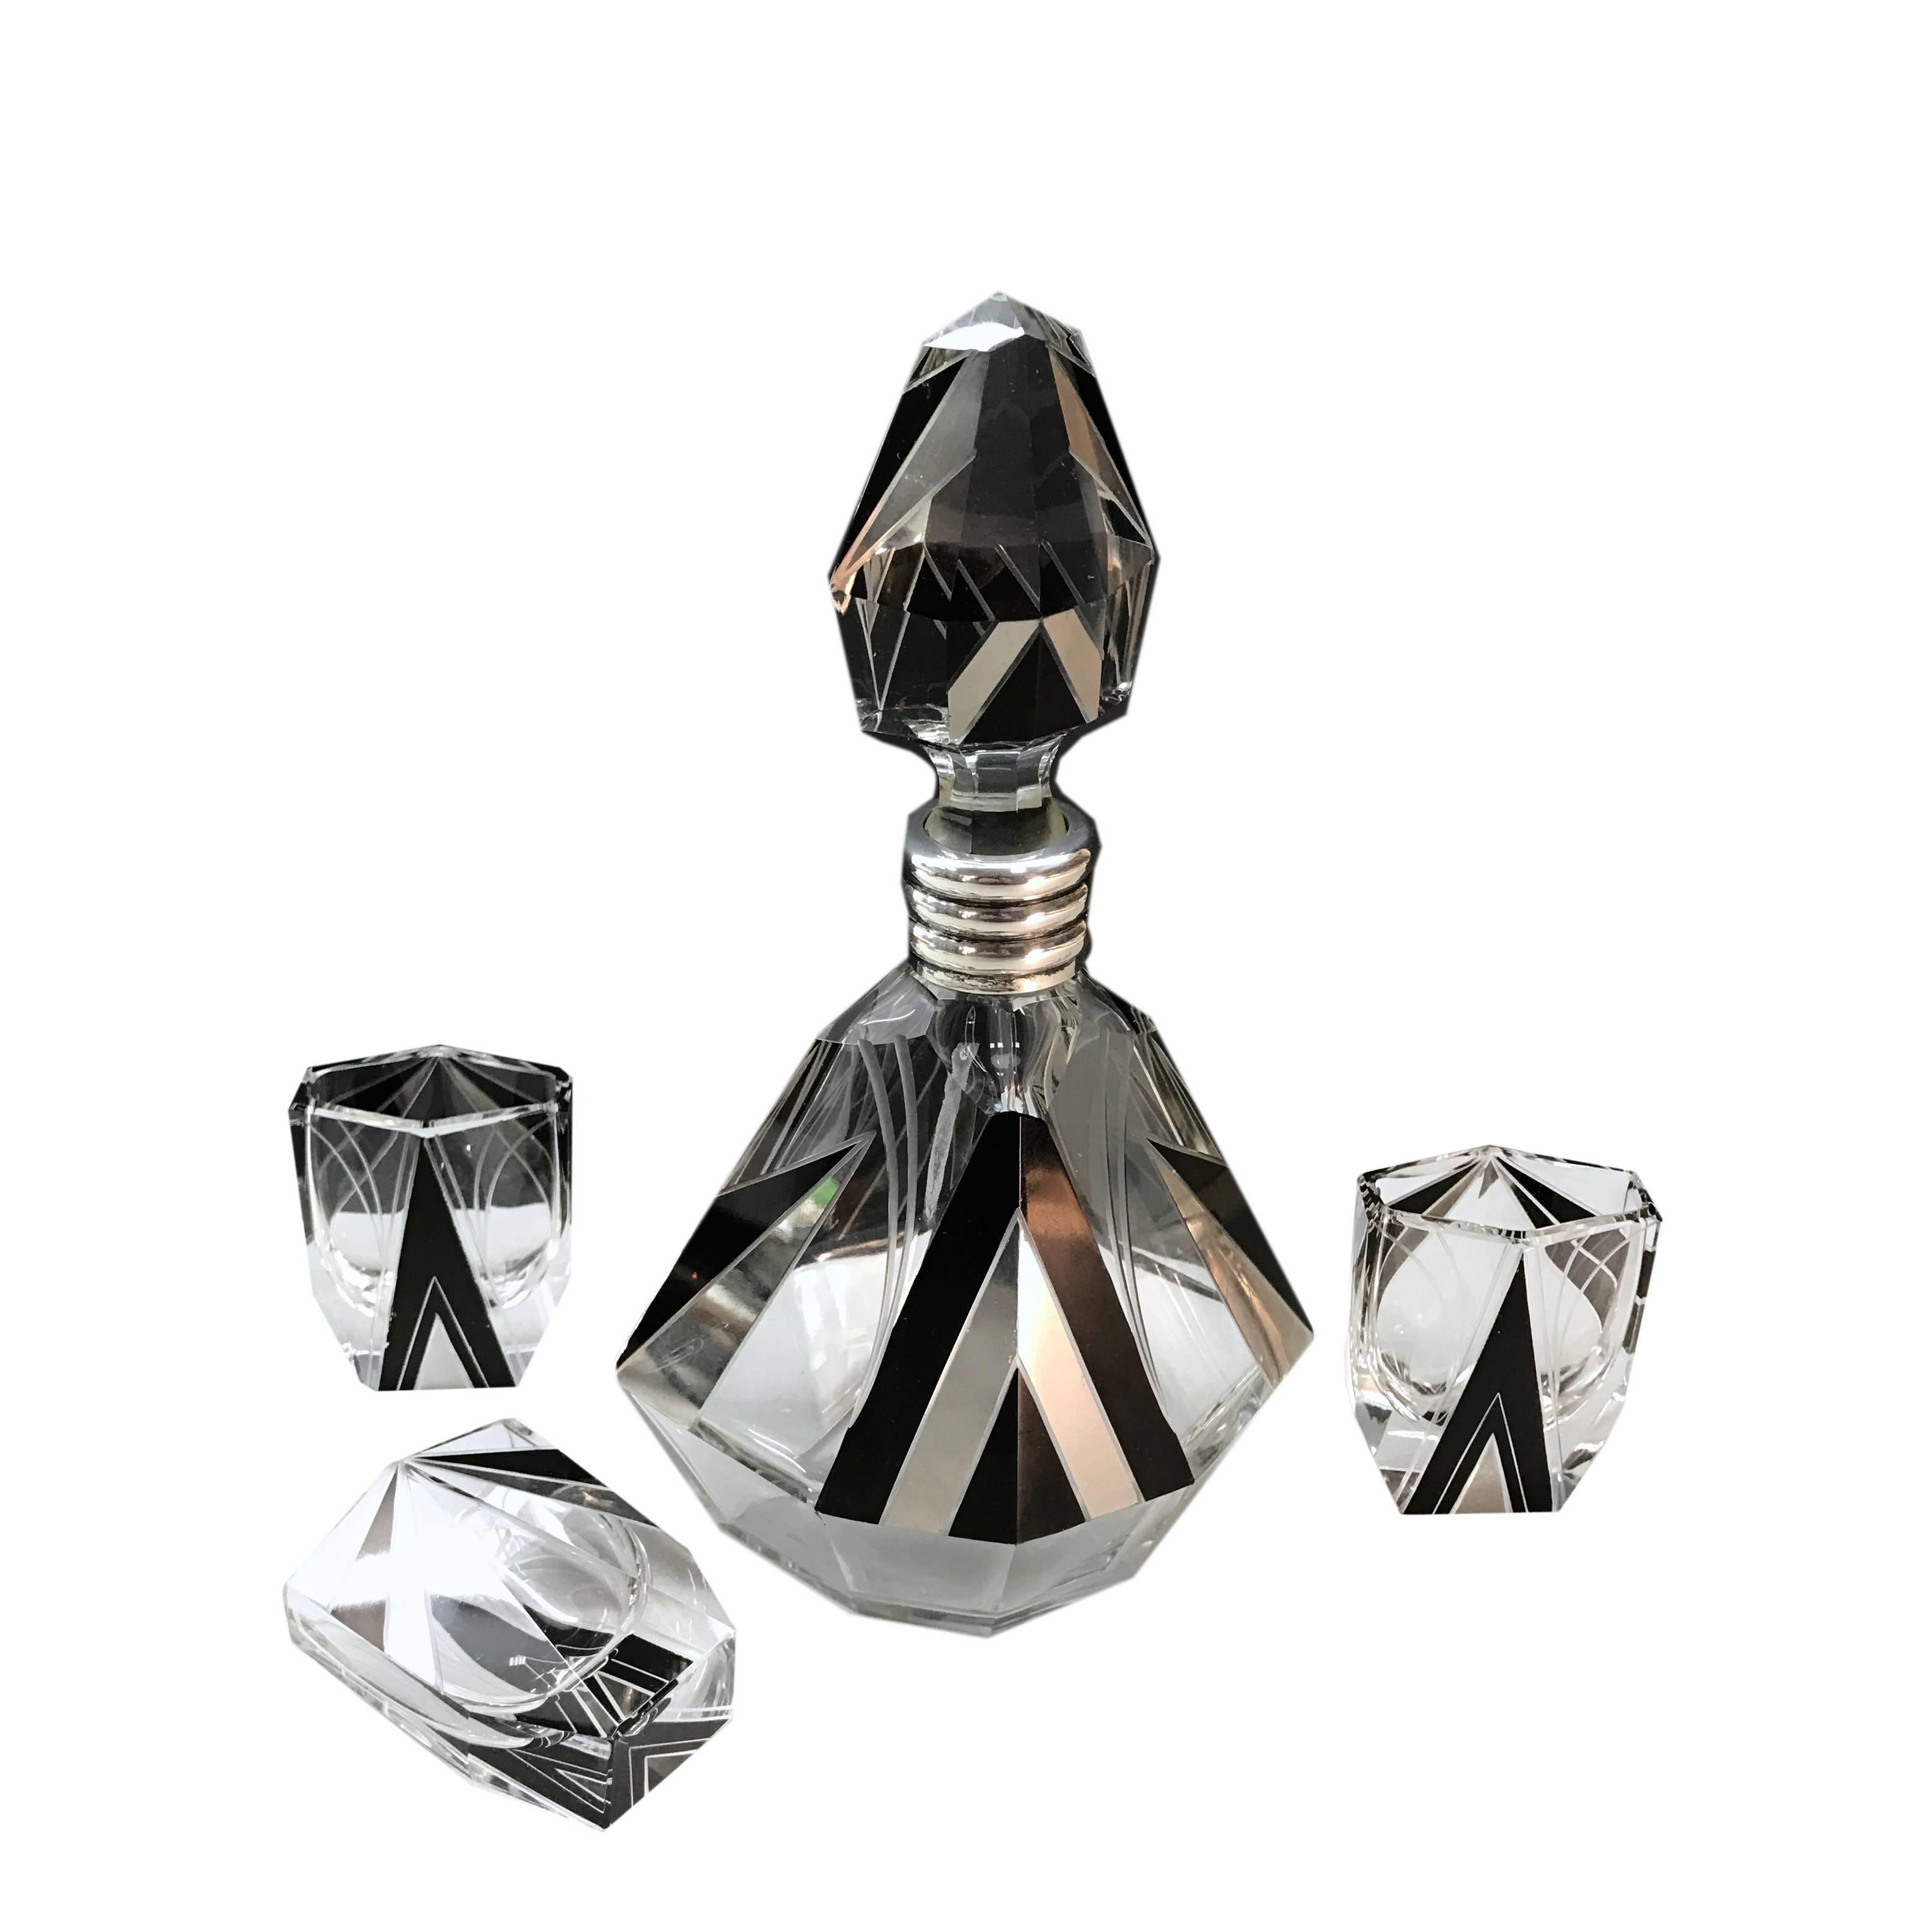 A 1930 decanter and three small glasses by Karl Palda Art Deco with a faceted shape, engraved and enameled. Finishing in 800 silver and silversmith punching. No chipping.